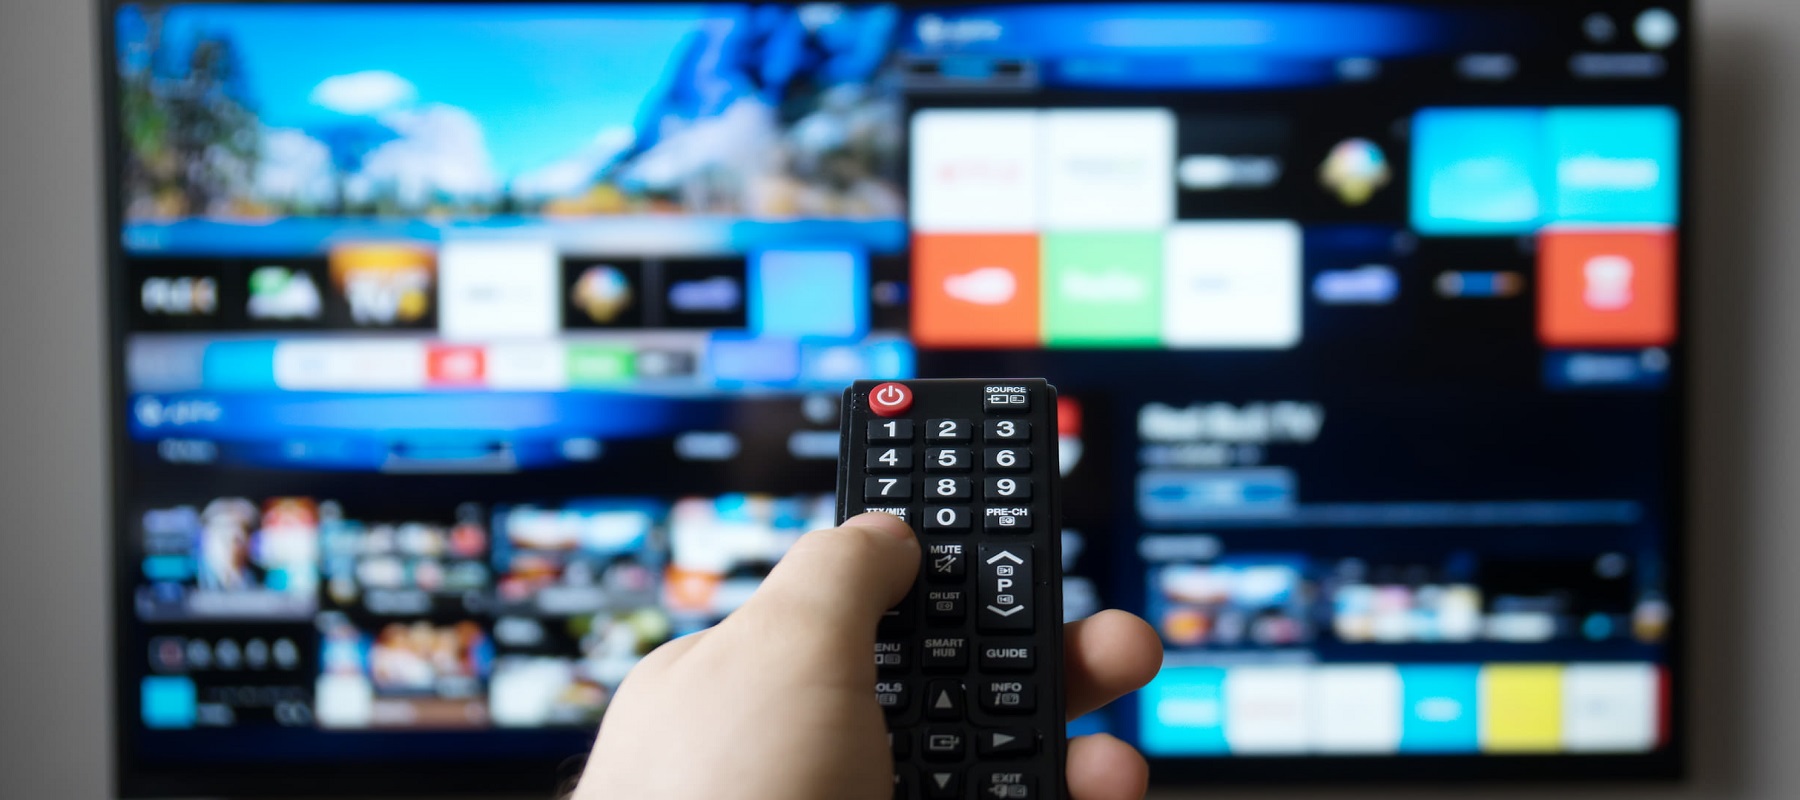 Connected TV viewers have higher levels of attention than linear television, study